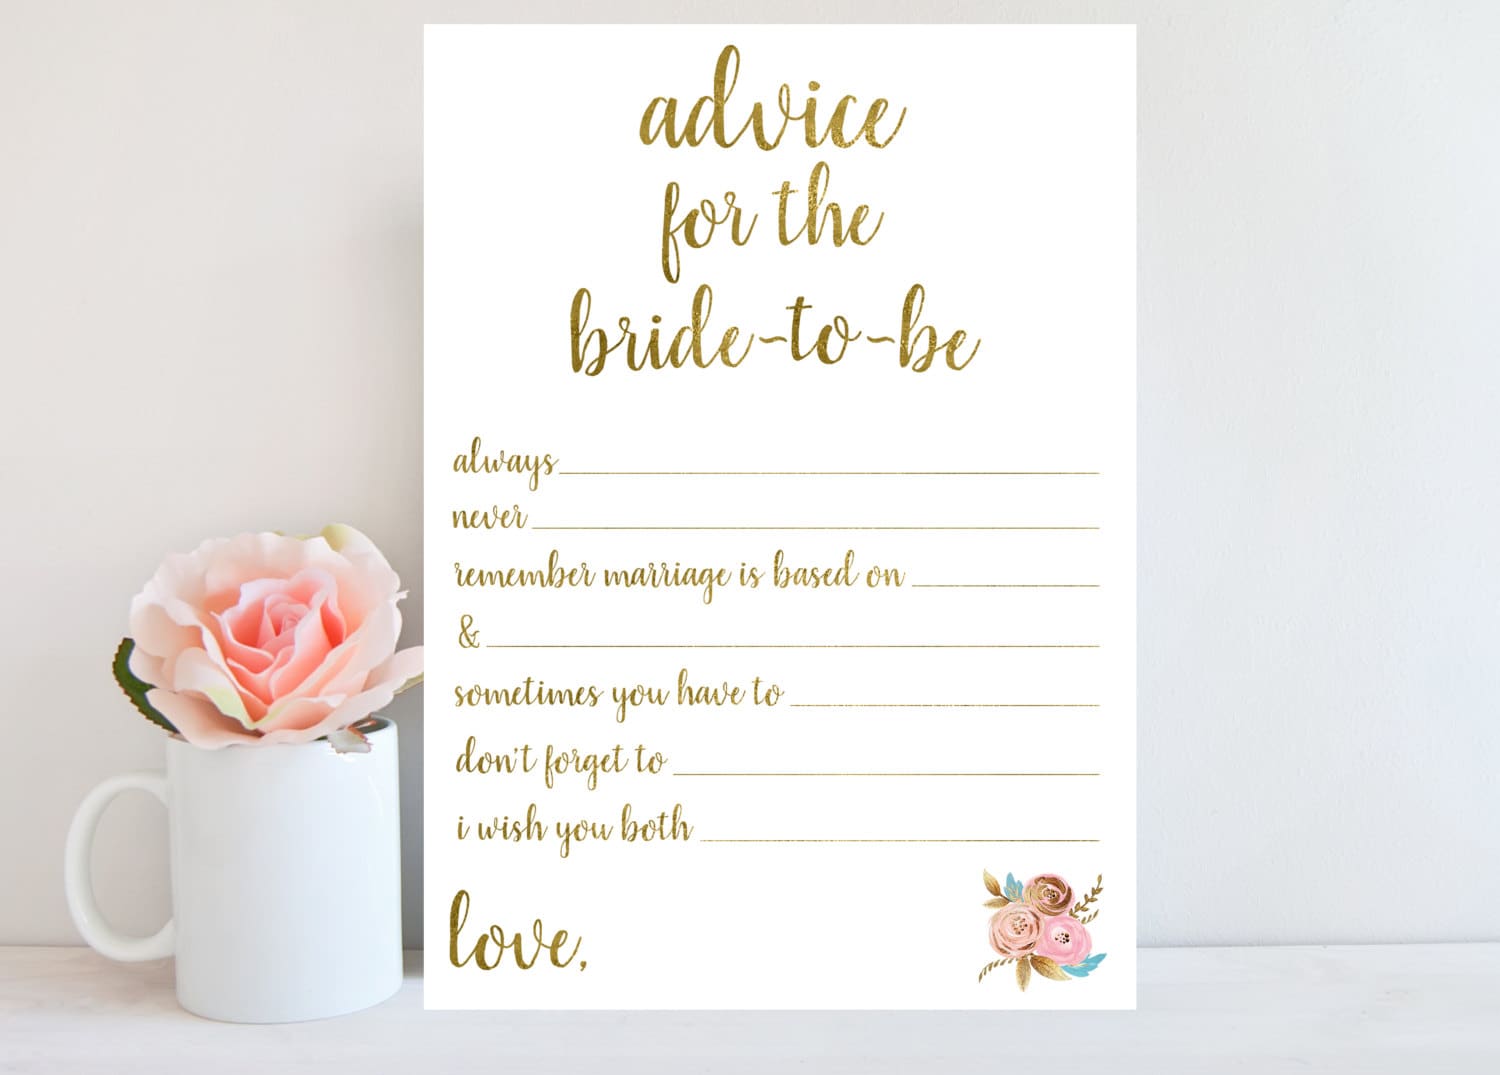 advice-for-bride-to-be-bridal-shower-advice-cards-printable